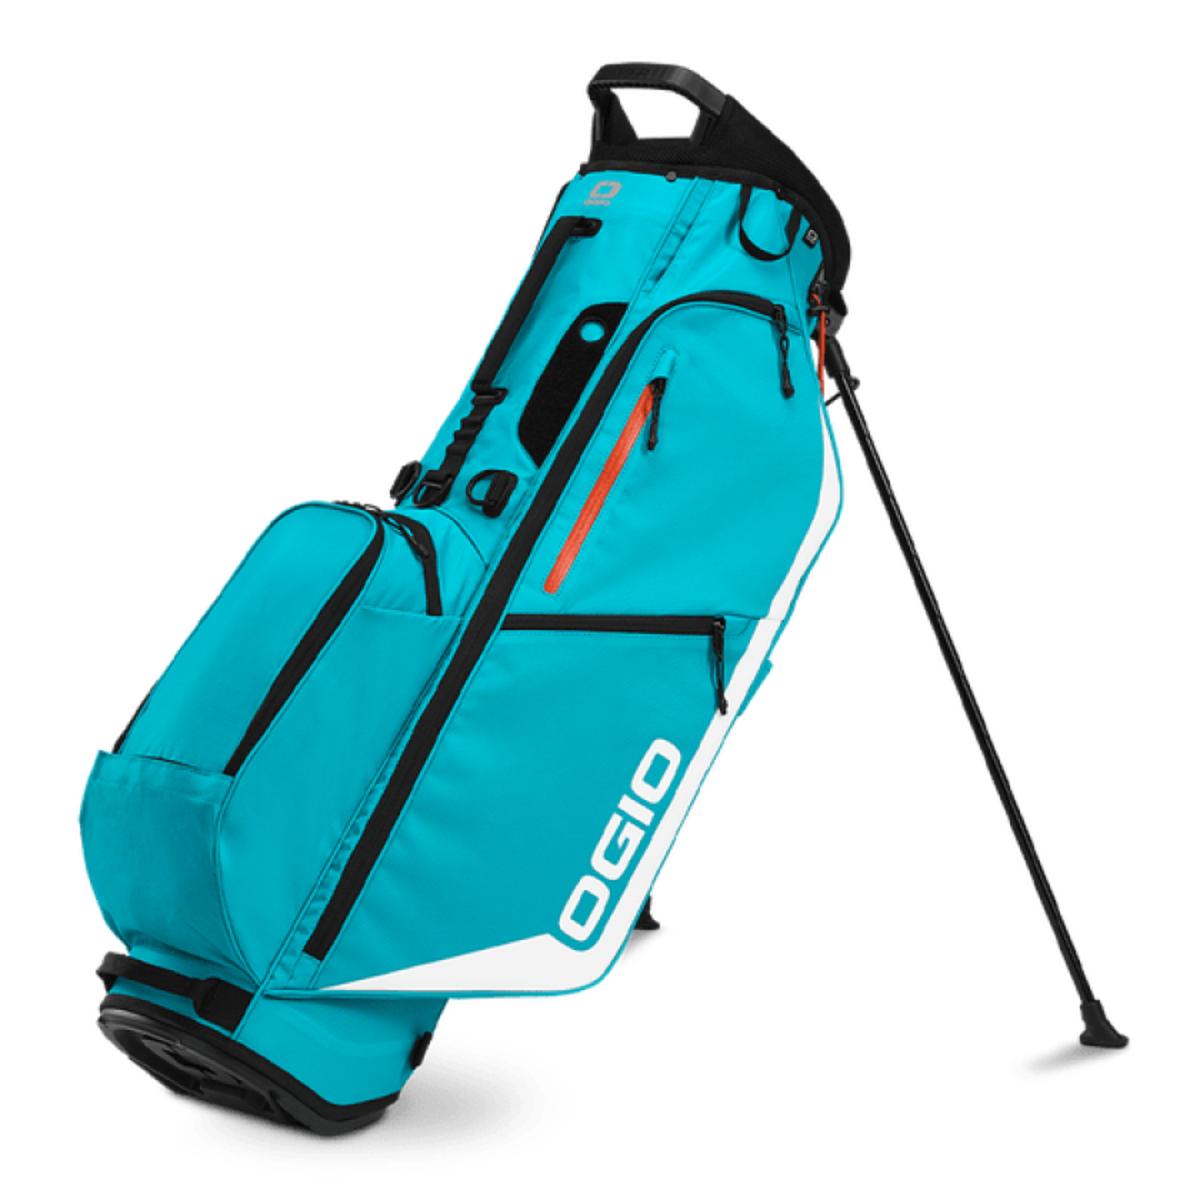 Ogio's Fuse Stand Bag 4.